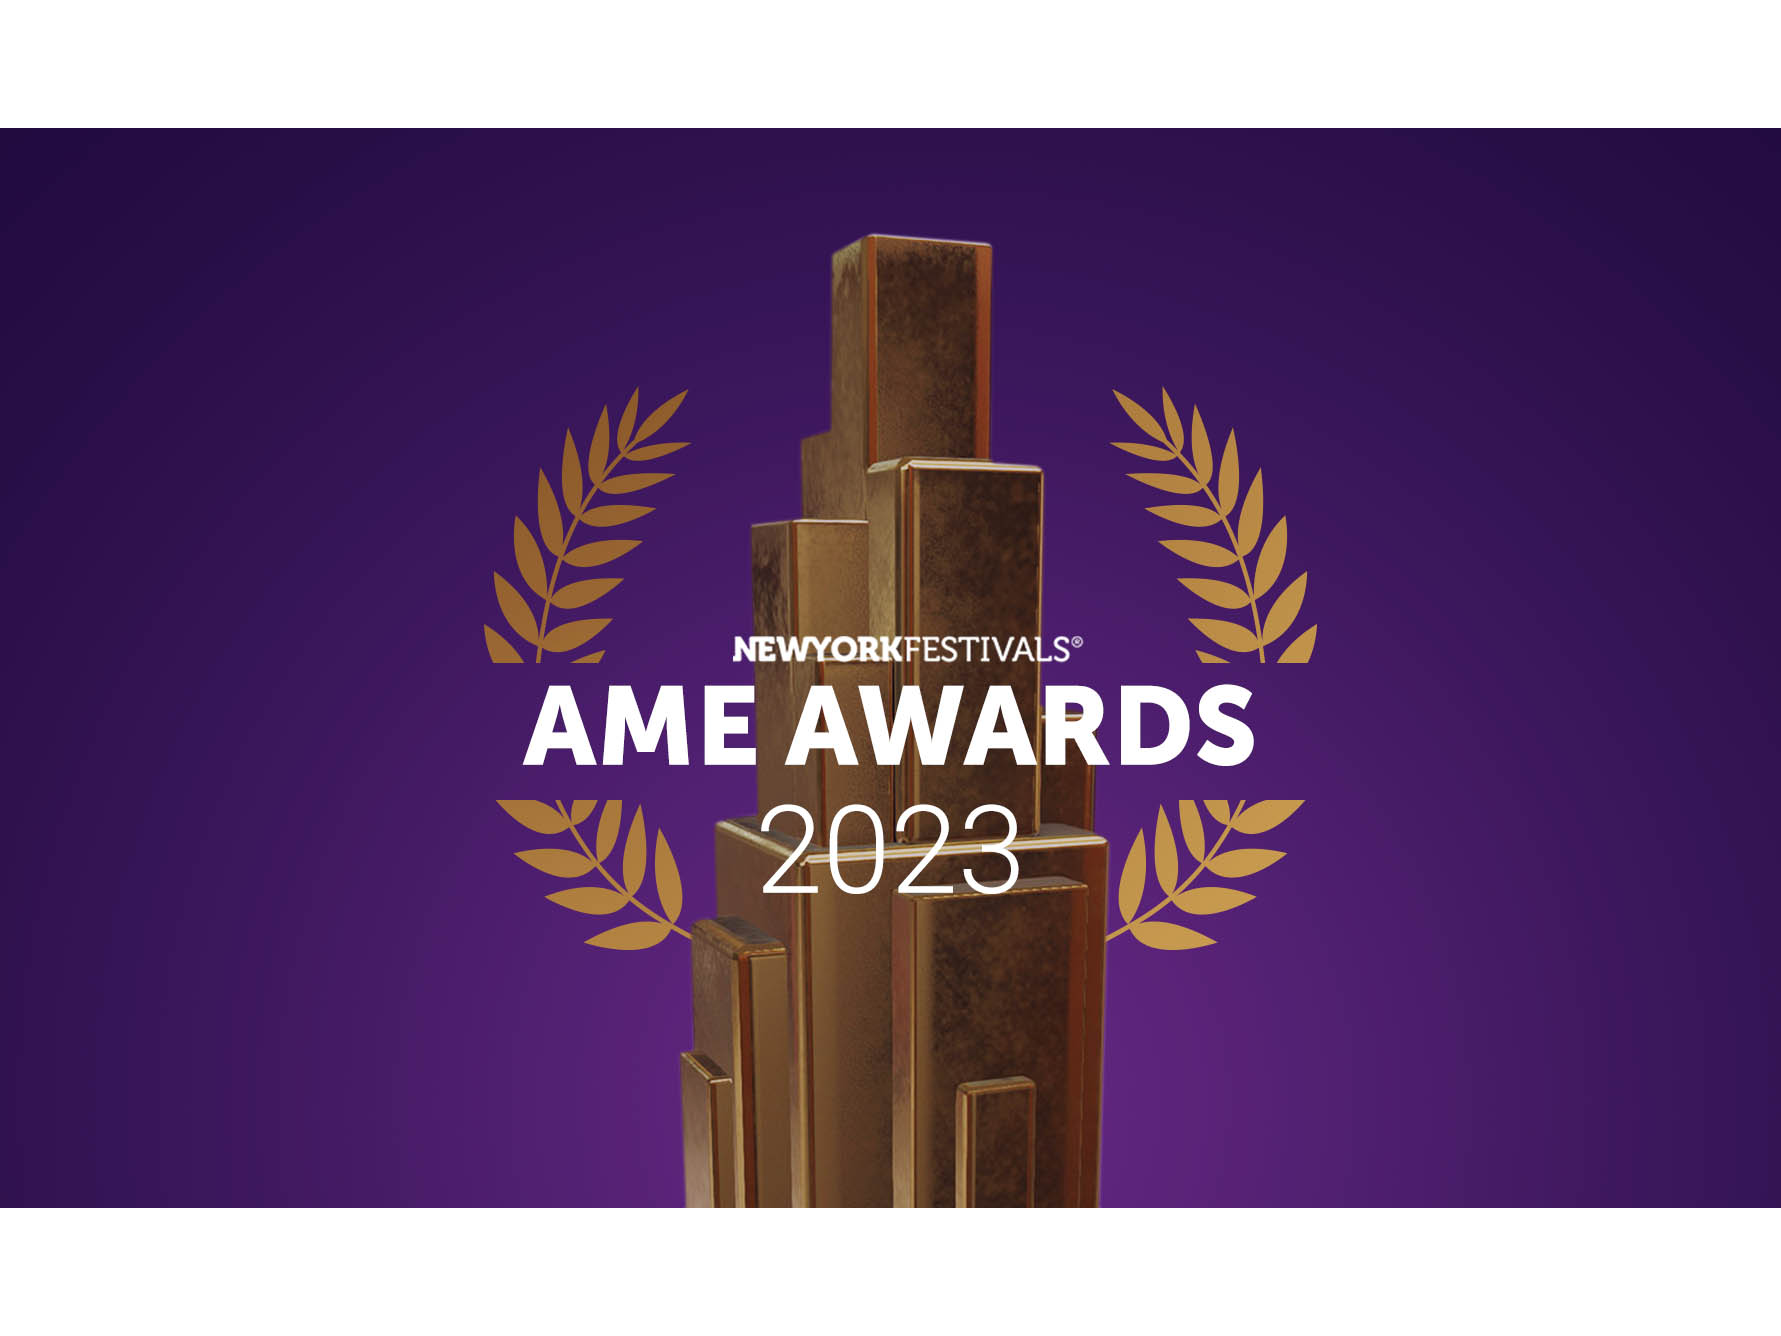 Publicis Groupe ME&T tops the New York Festivals' AME Awards 2023